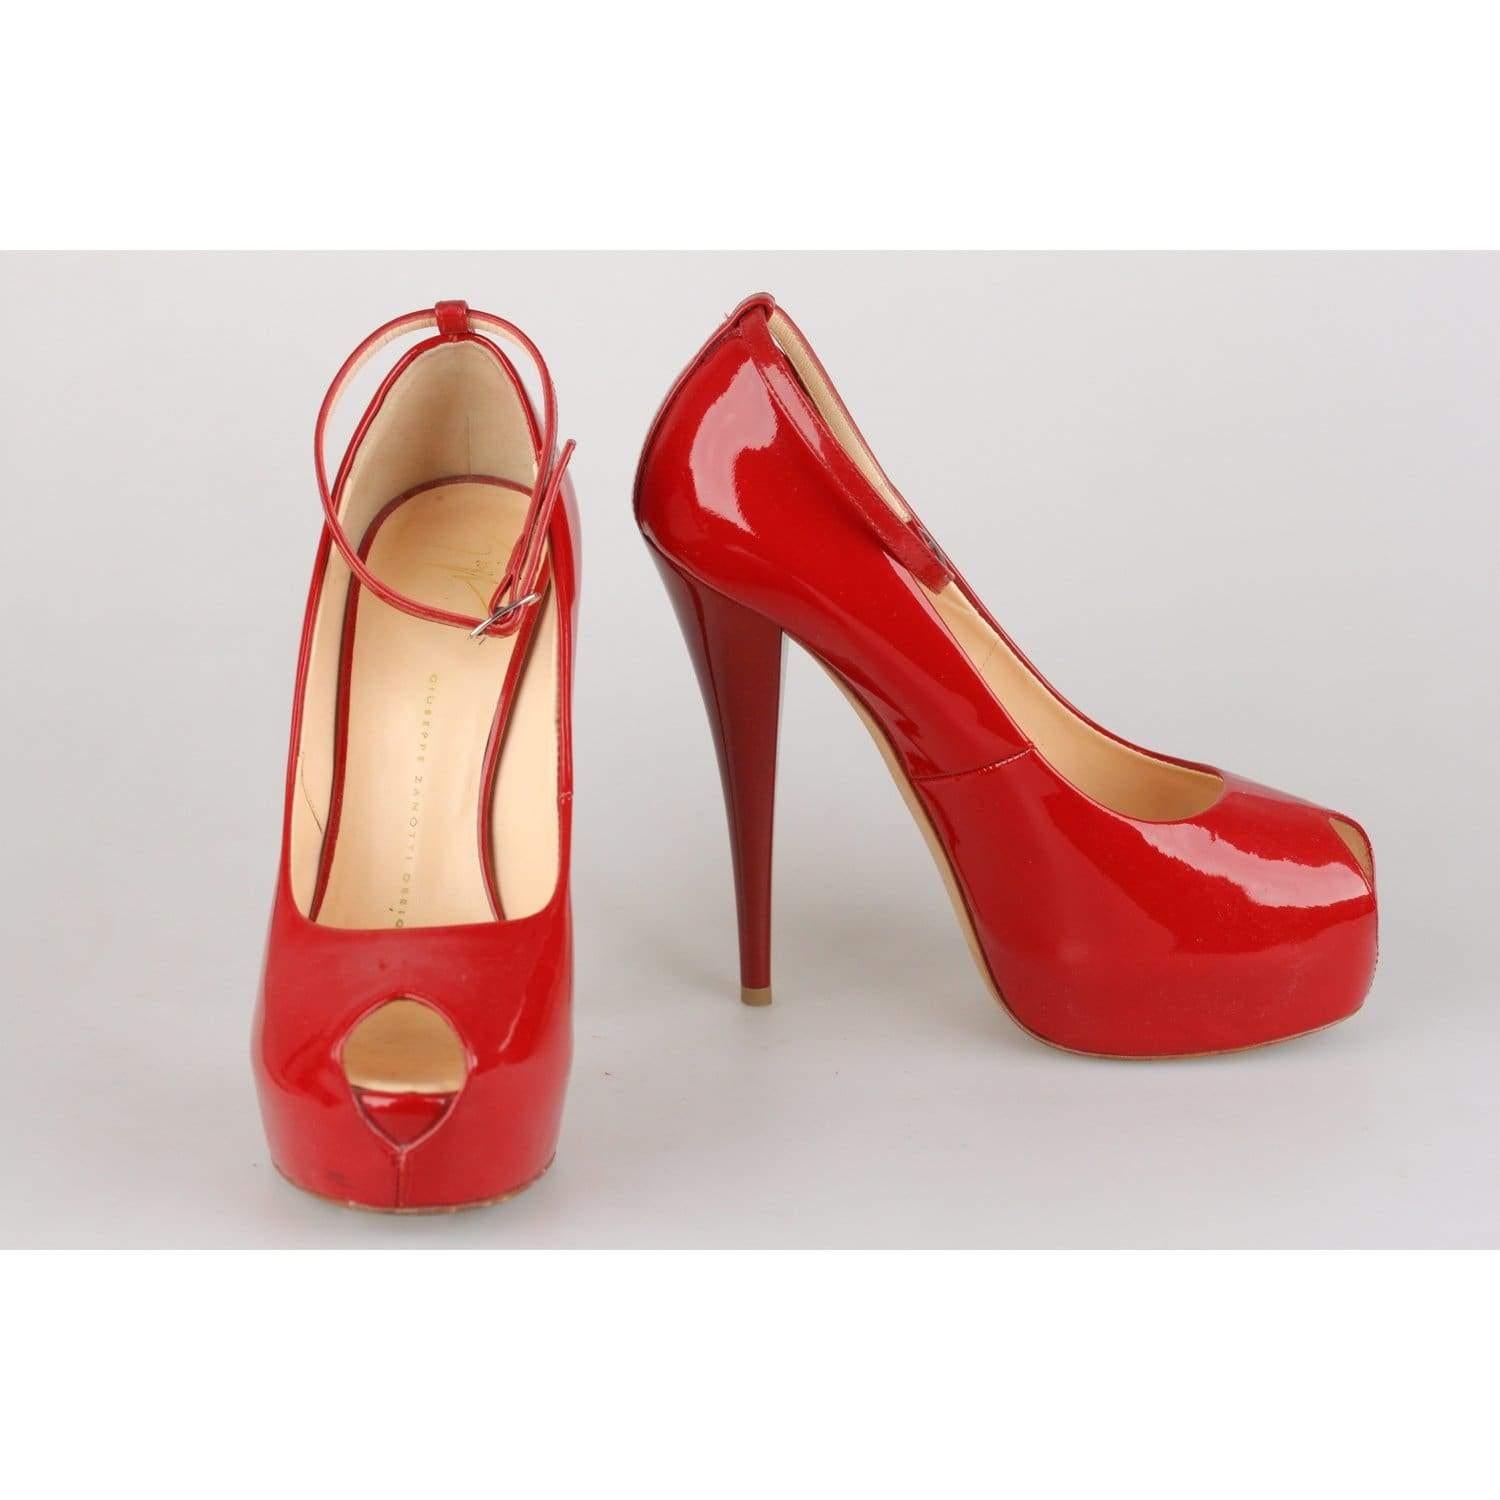 MATERIAL: Patent Leather COLOR: Red MODEL: Open toe GENDER: Women SIZE: 38.5 COUNTRY OF MANUFACTURE: Italy Condition CONDITION DETAILS: B :GOOD CONDITION - Some light wear of use - Some wear and scratches on the outsoles - Internal Ref: -